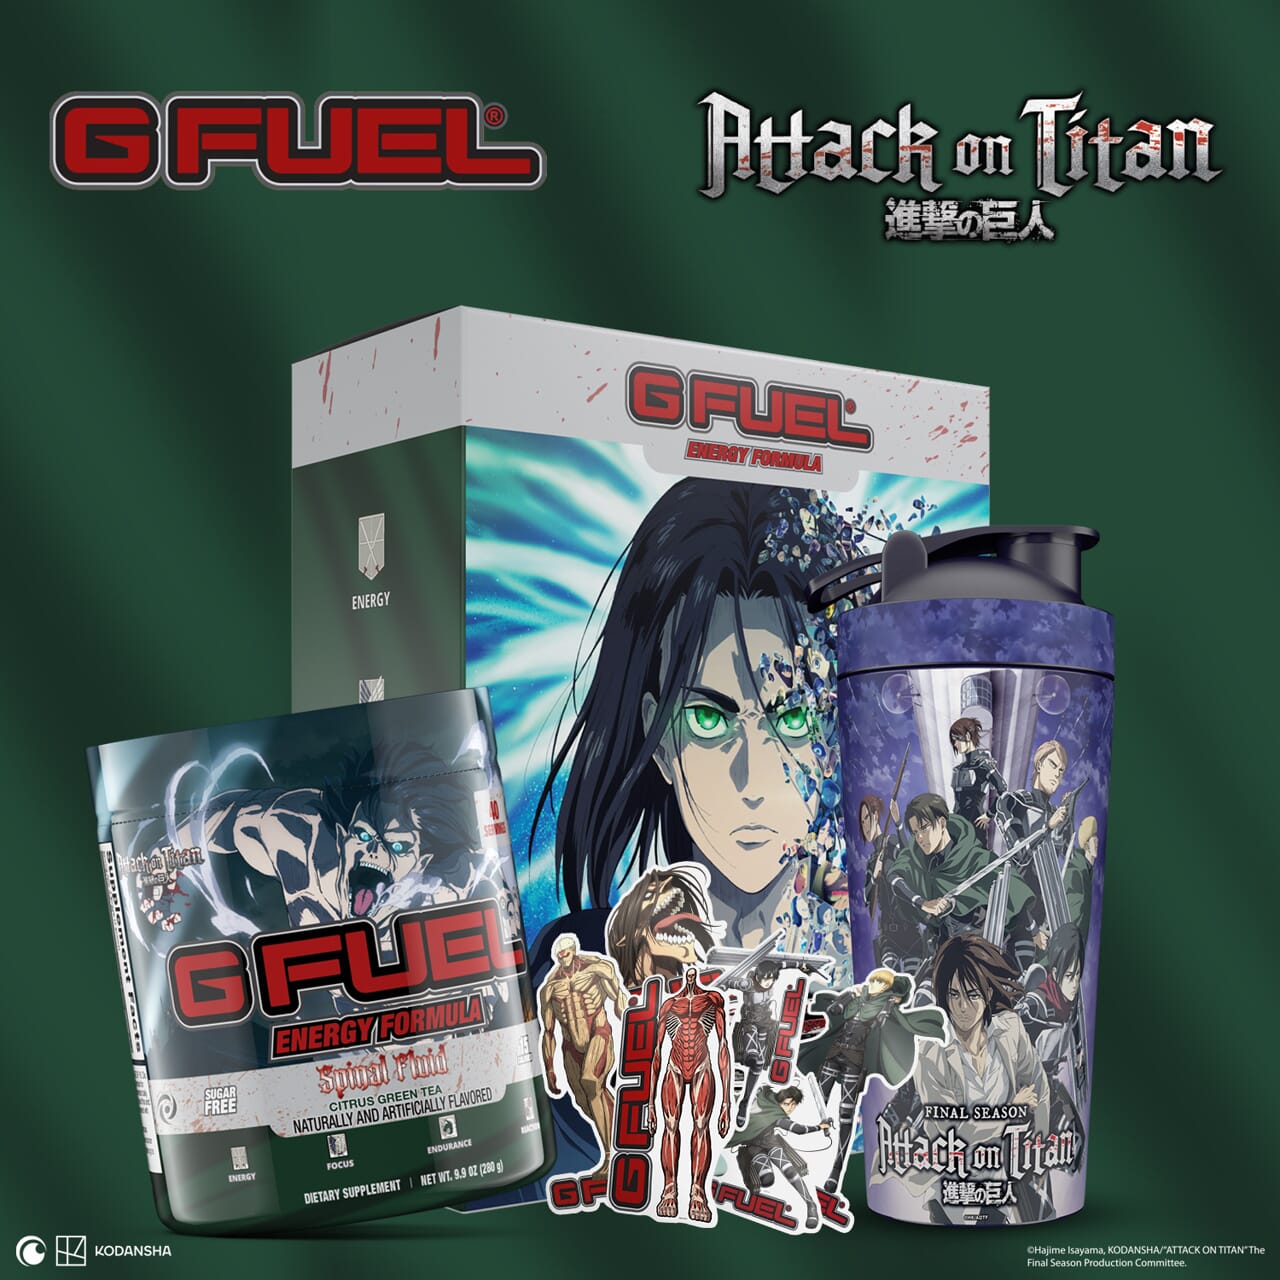 G FUEL Spinal Fluid - Inspired by "Attack on Titan"